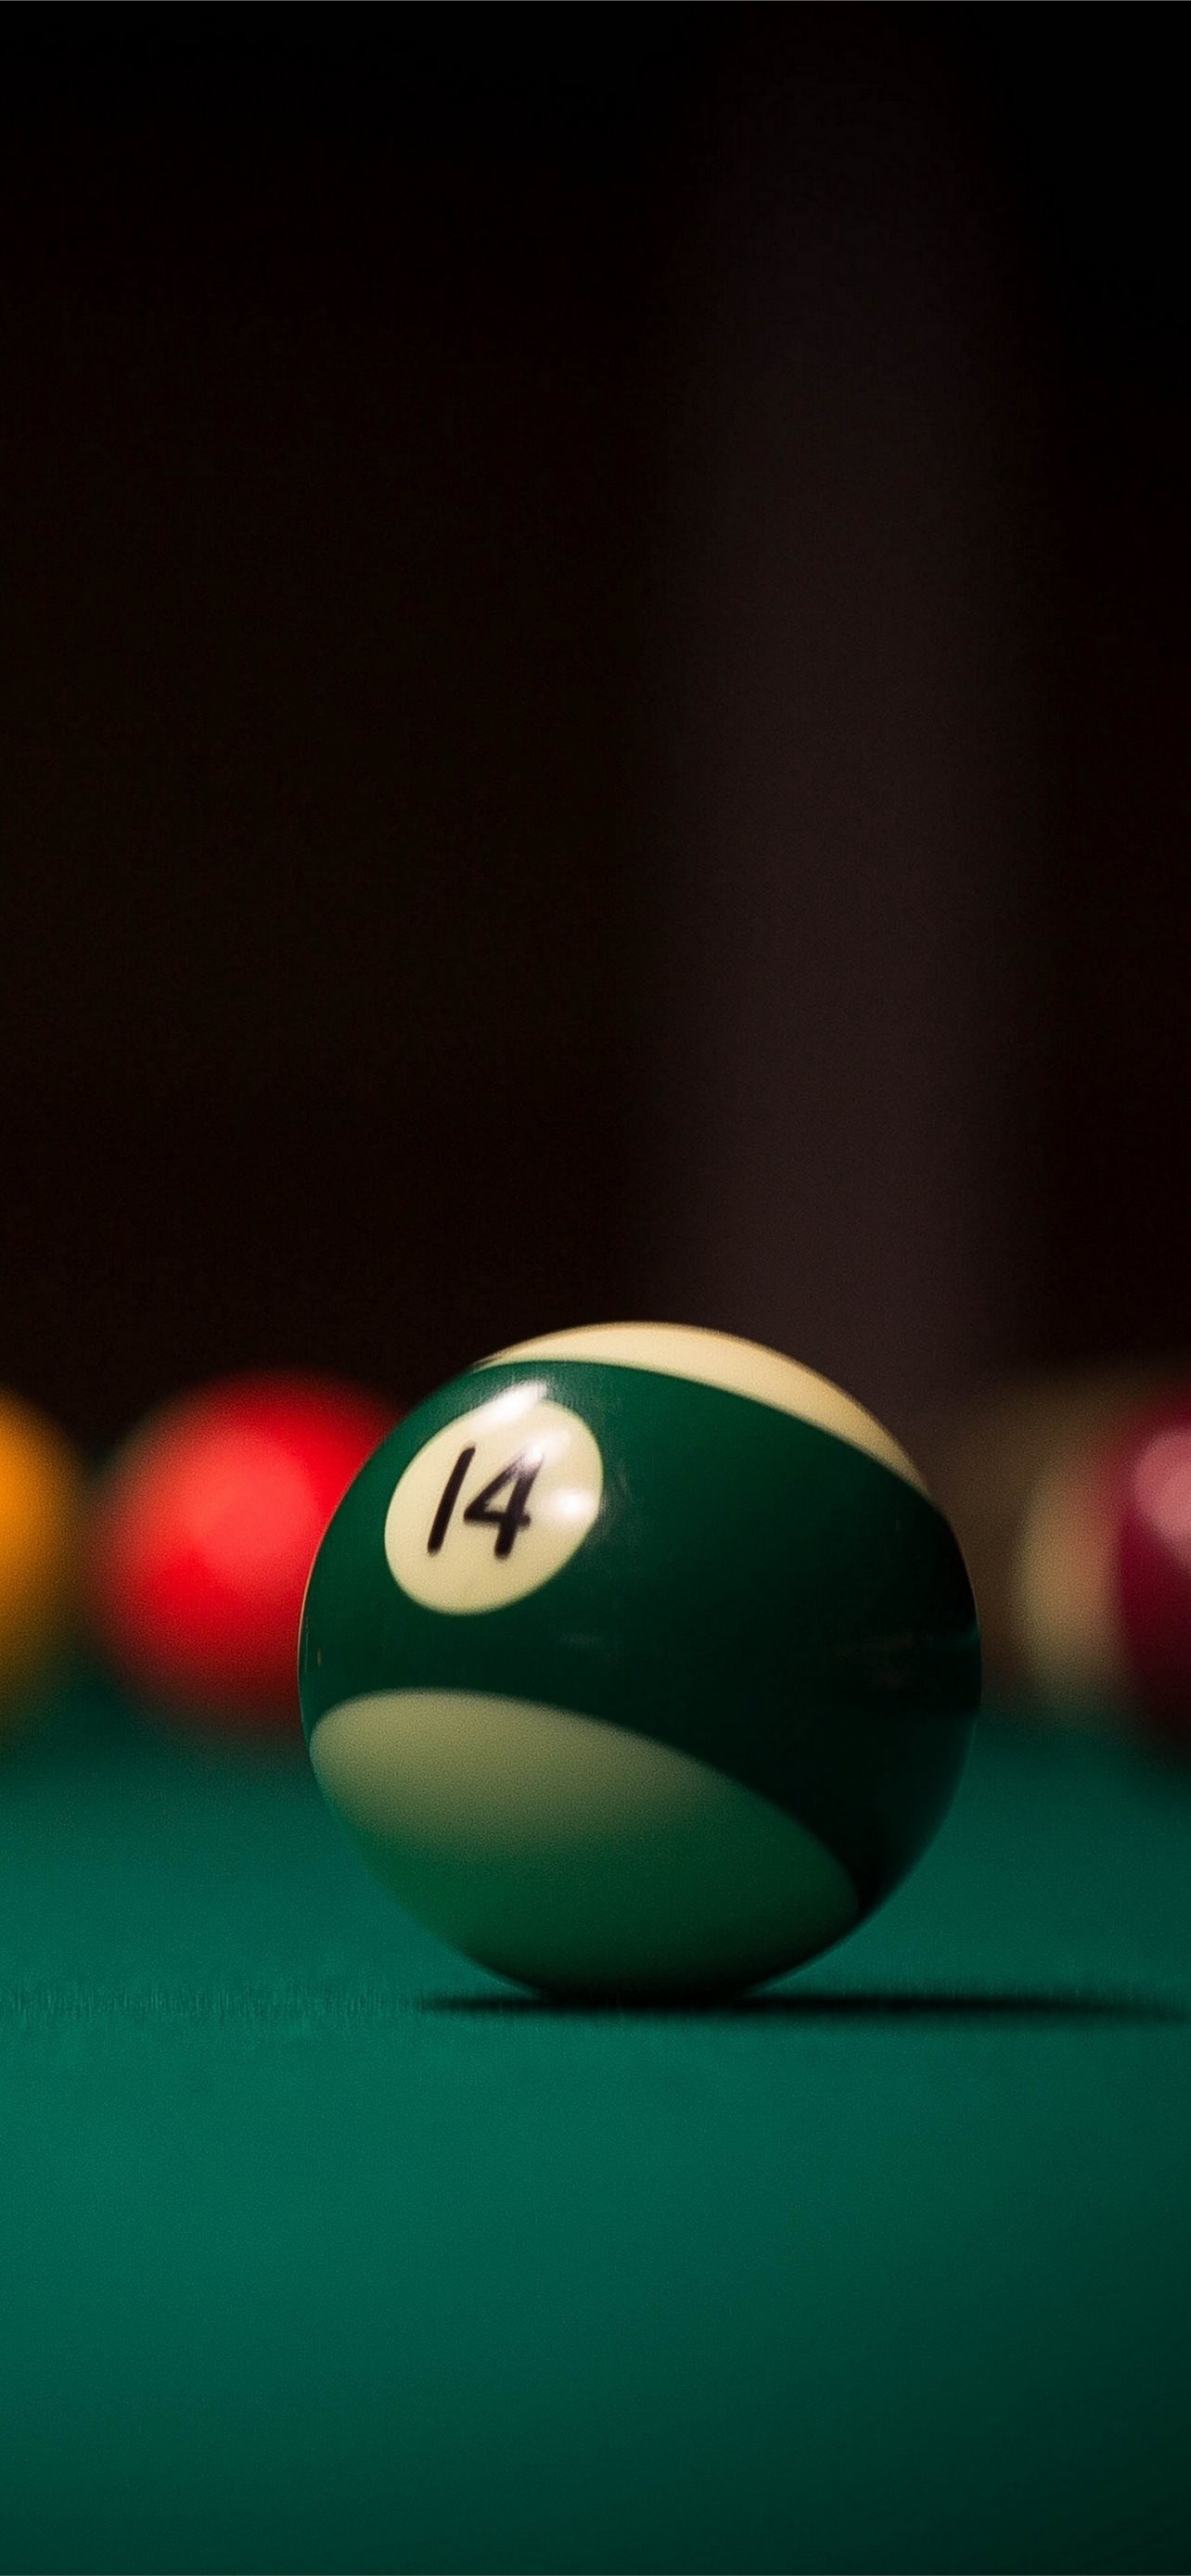 Pool (Cue Sports): Object balls, Small but hard and numbered balls used in carom, English billiards, and snooker. 1290x2780 HD Wallpaper.